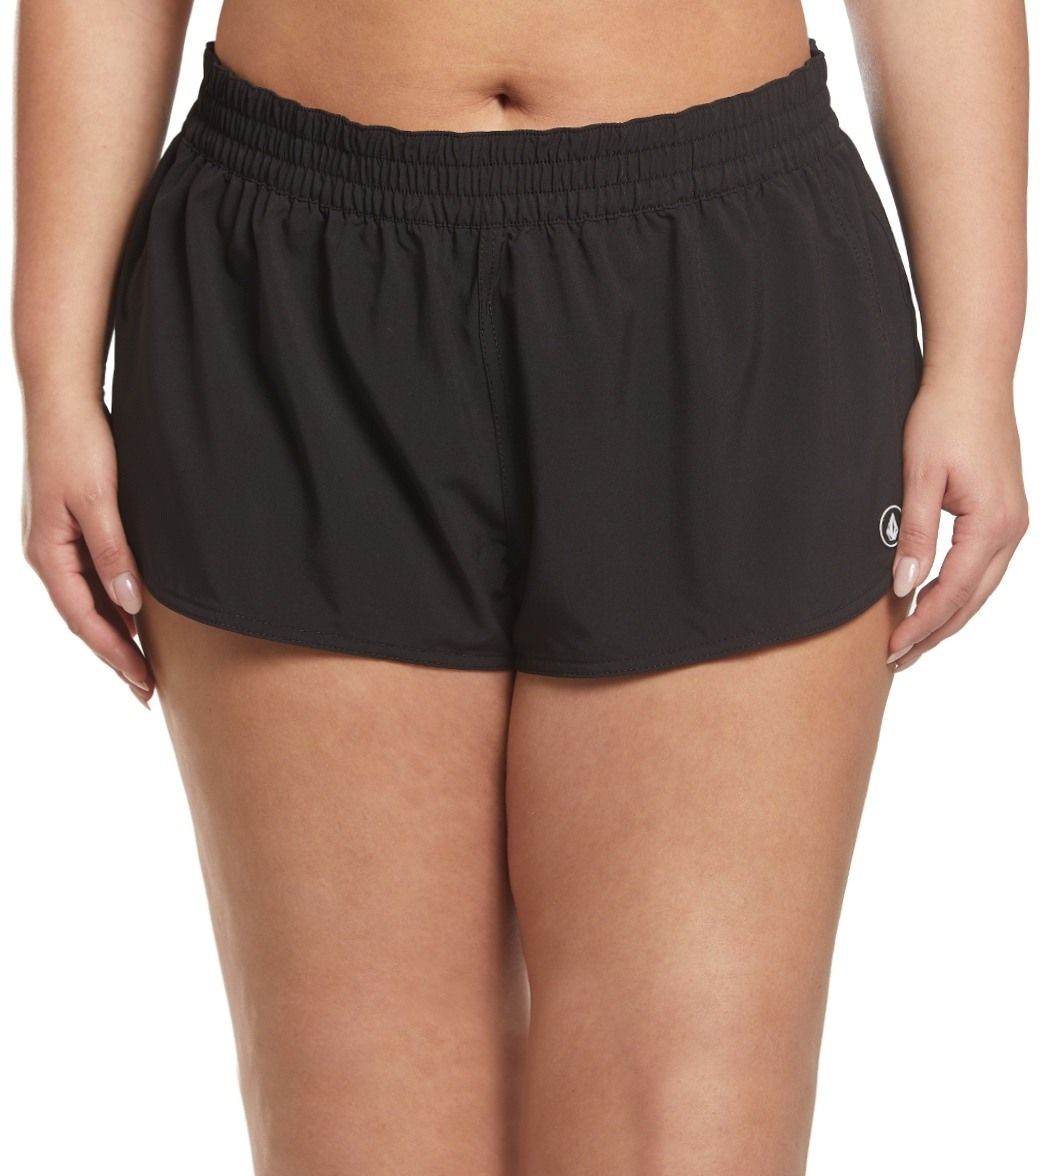 Volcom Plus Size Simply Solid 2 Boardshorts - Black 18W - Swimoutlet.com